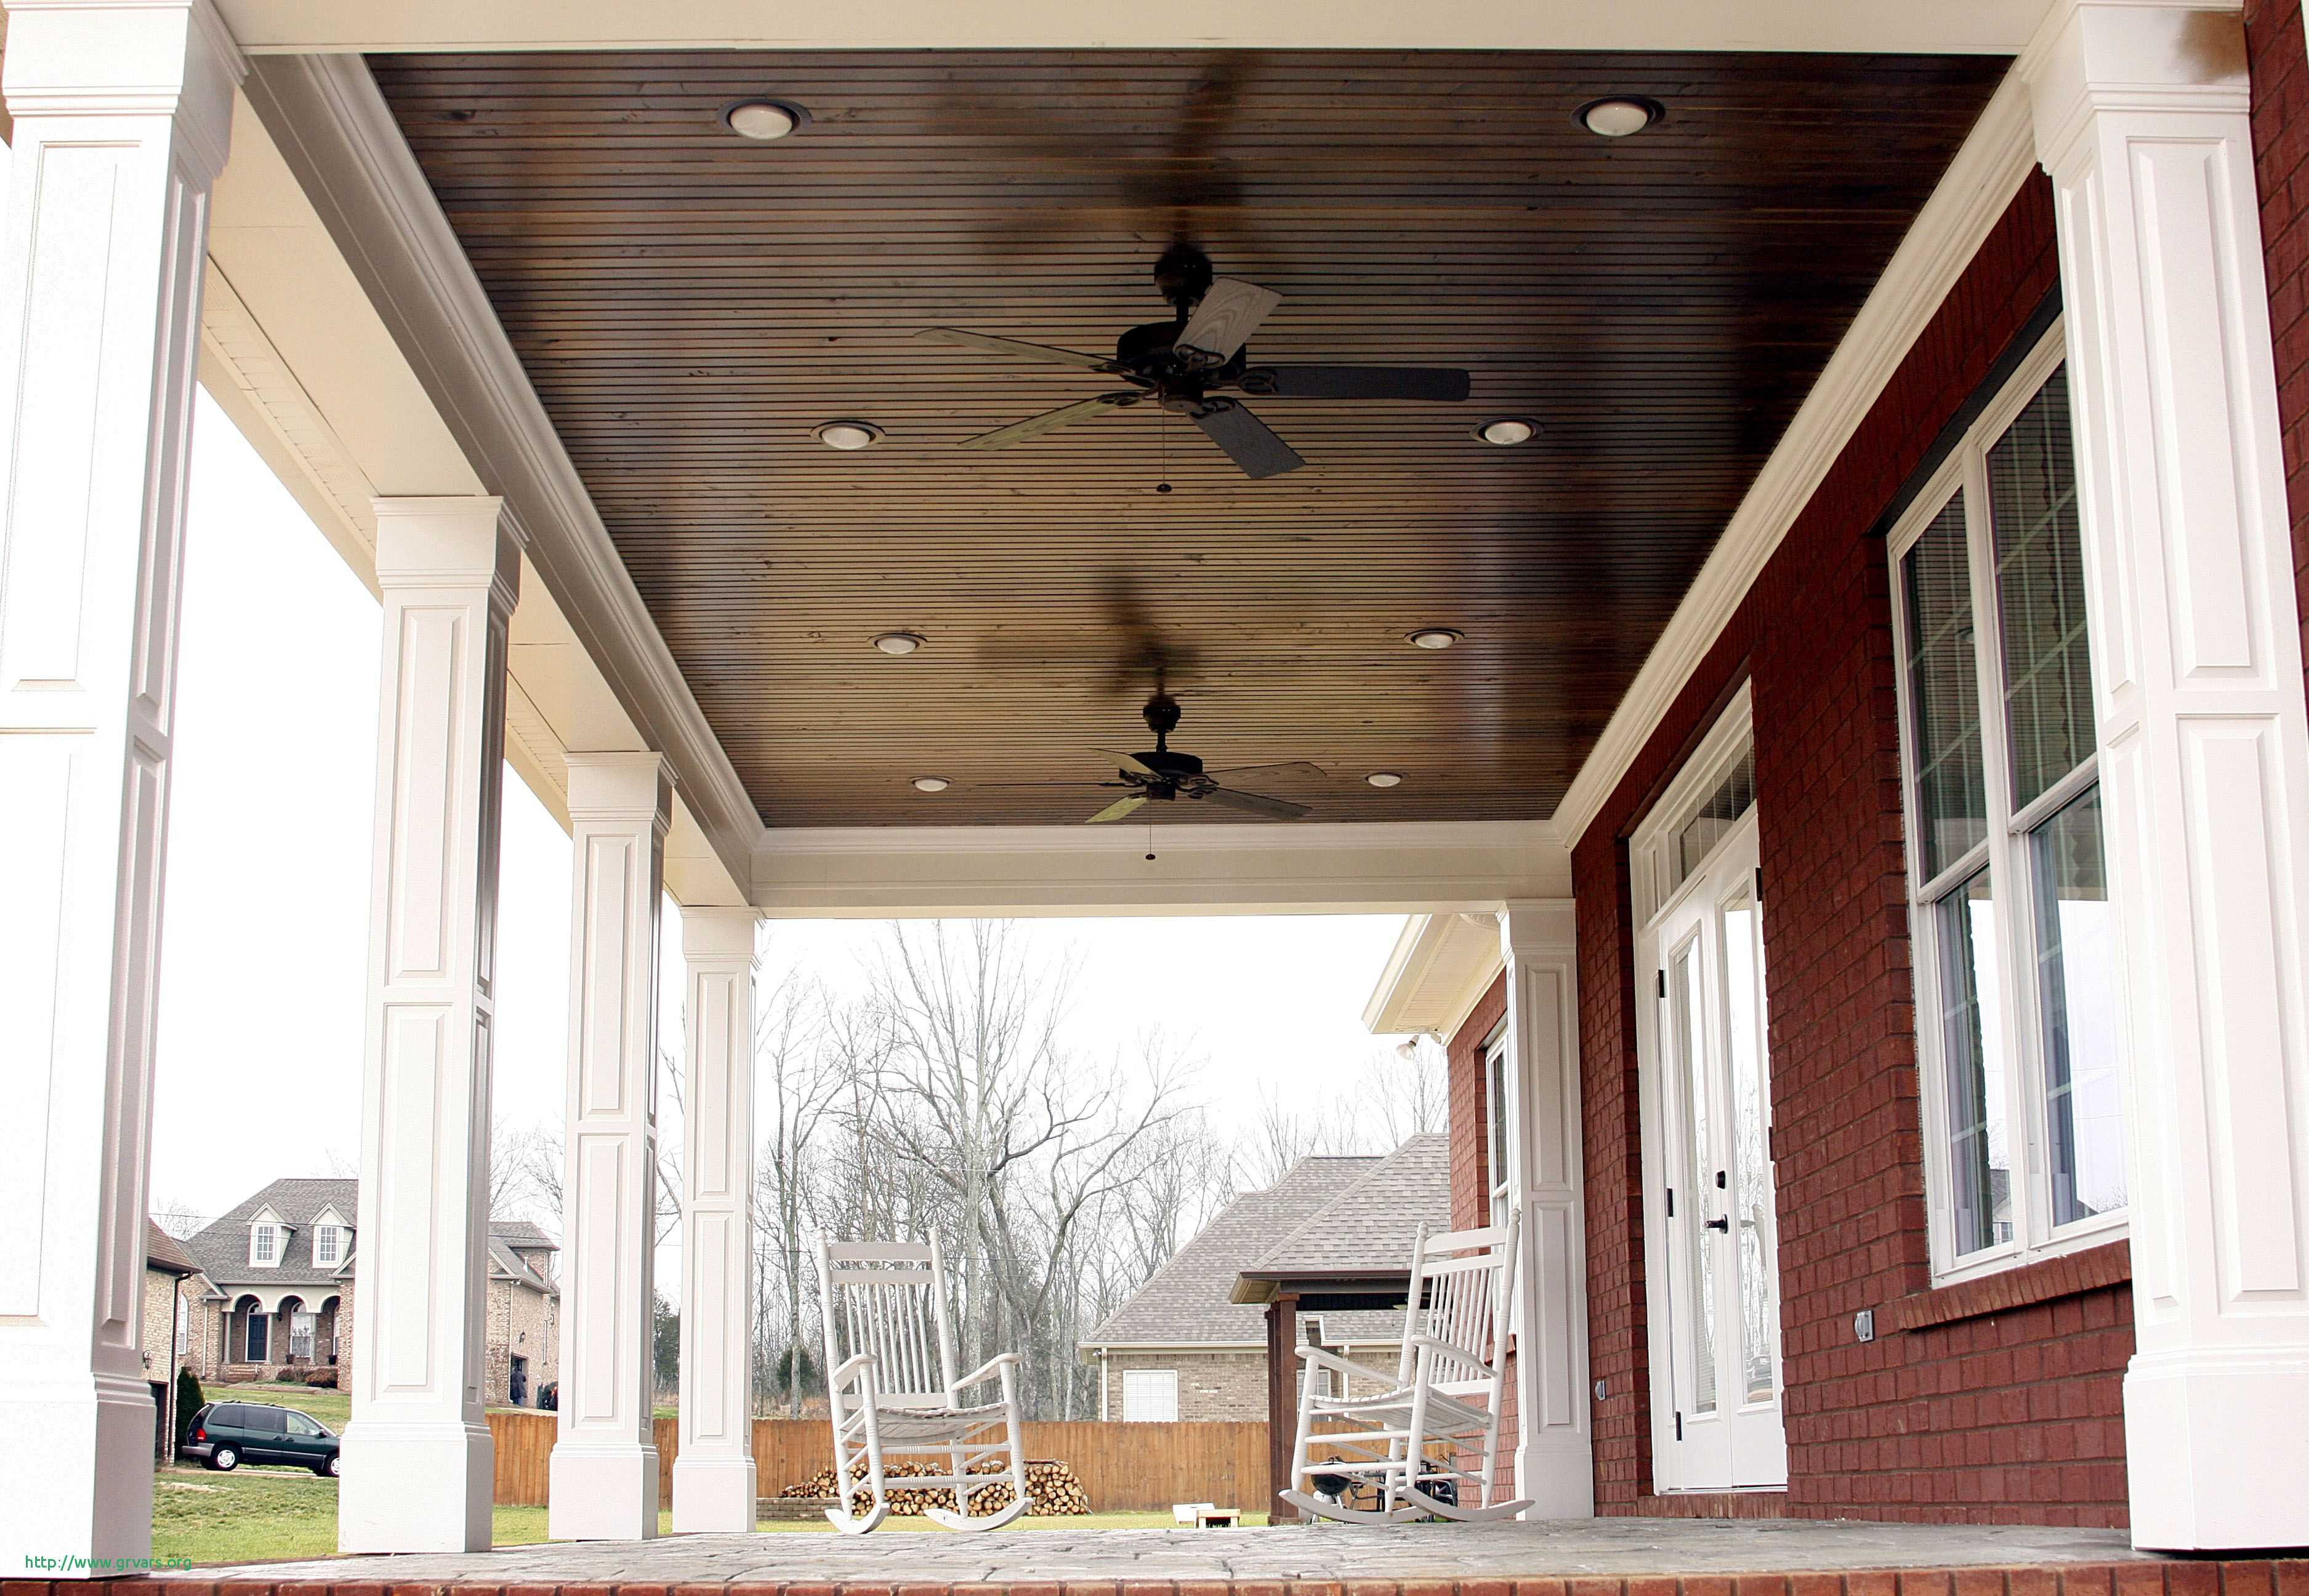 tongue and groove ceiling with hardwood floors of installing tongue and groove porch flooring alagant true beadboard in installing tongue and groove porch flooring alagant true beadboard porch ceiling over stained concrete